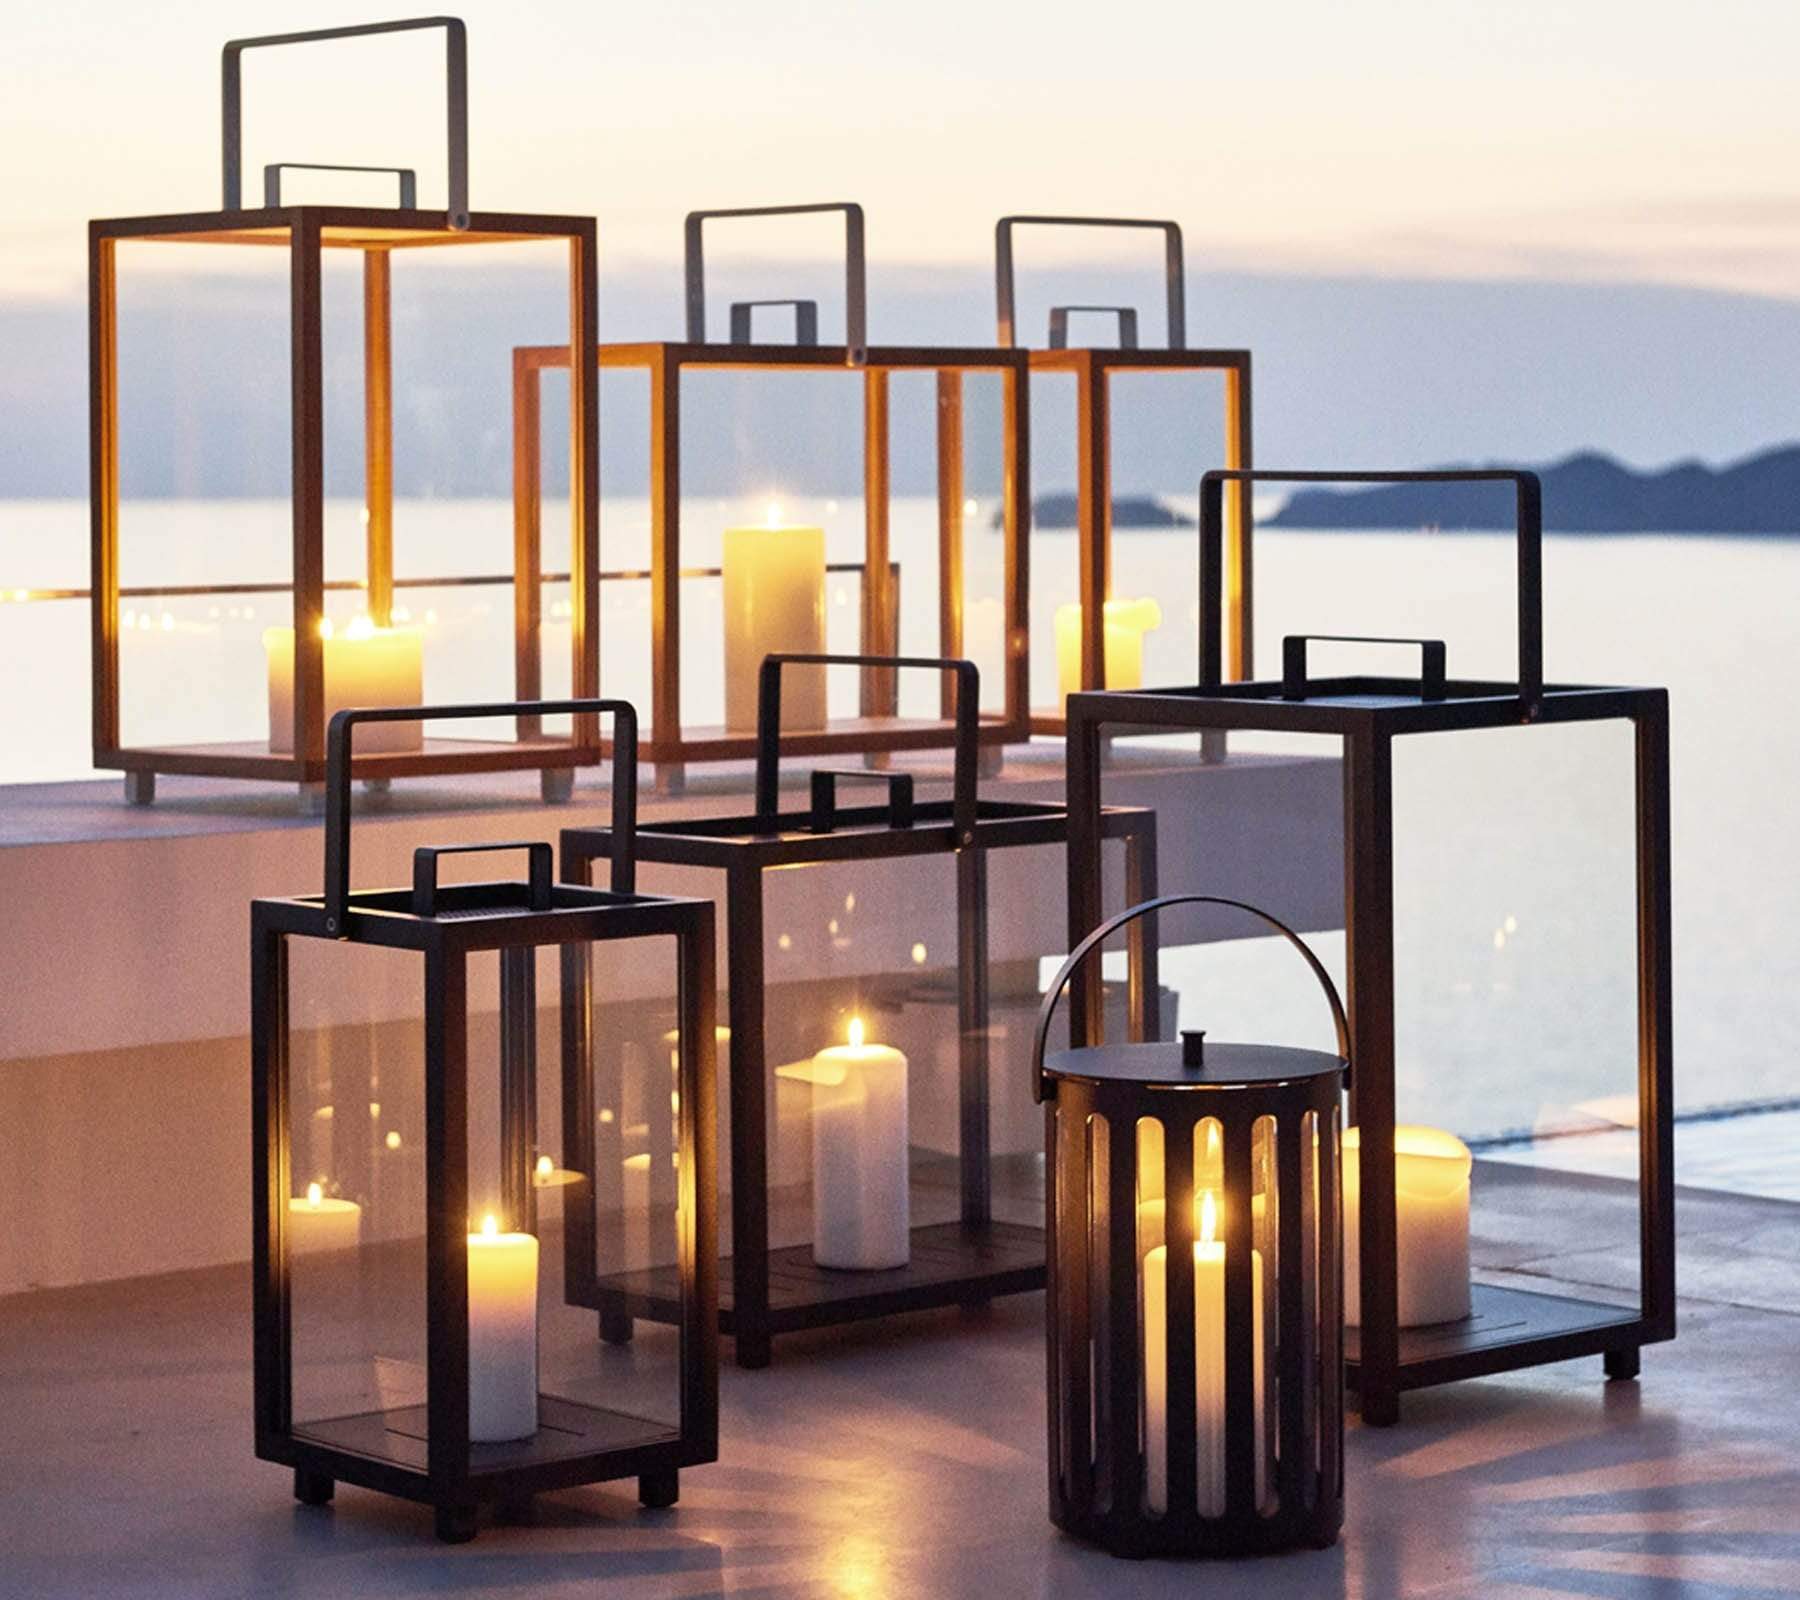 Boxhill's Lighthouse Outdoor Large Teak Lantern for Candles | Set of 2 lifestyle image with Lighthouse Outdoor Large Aluminum Lantern and Lighttube Outdoor large Lantern at seafront